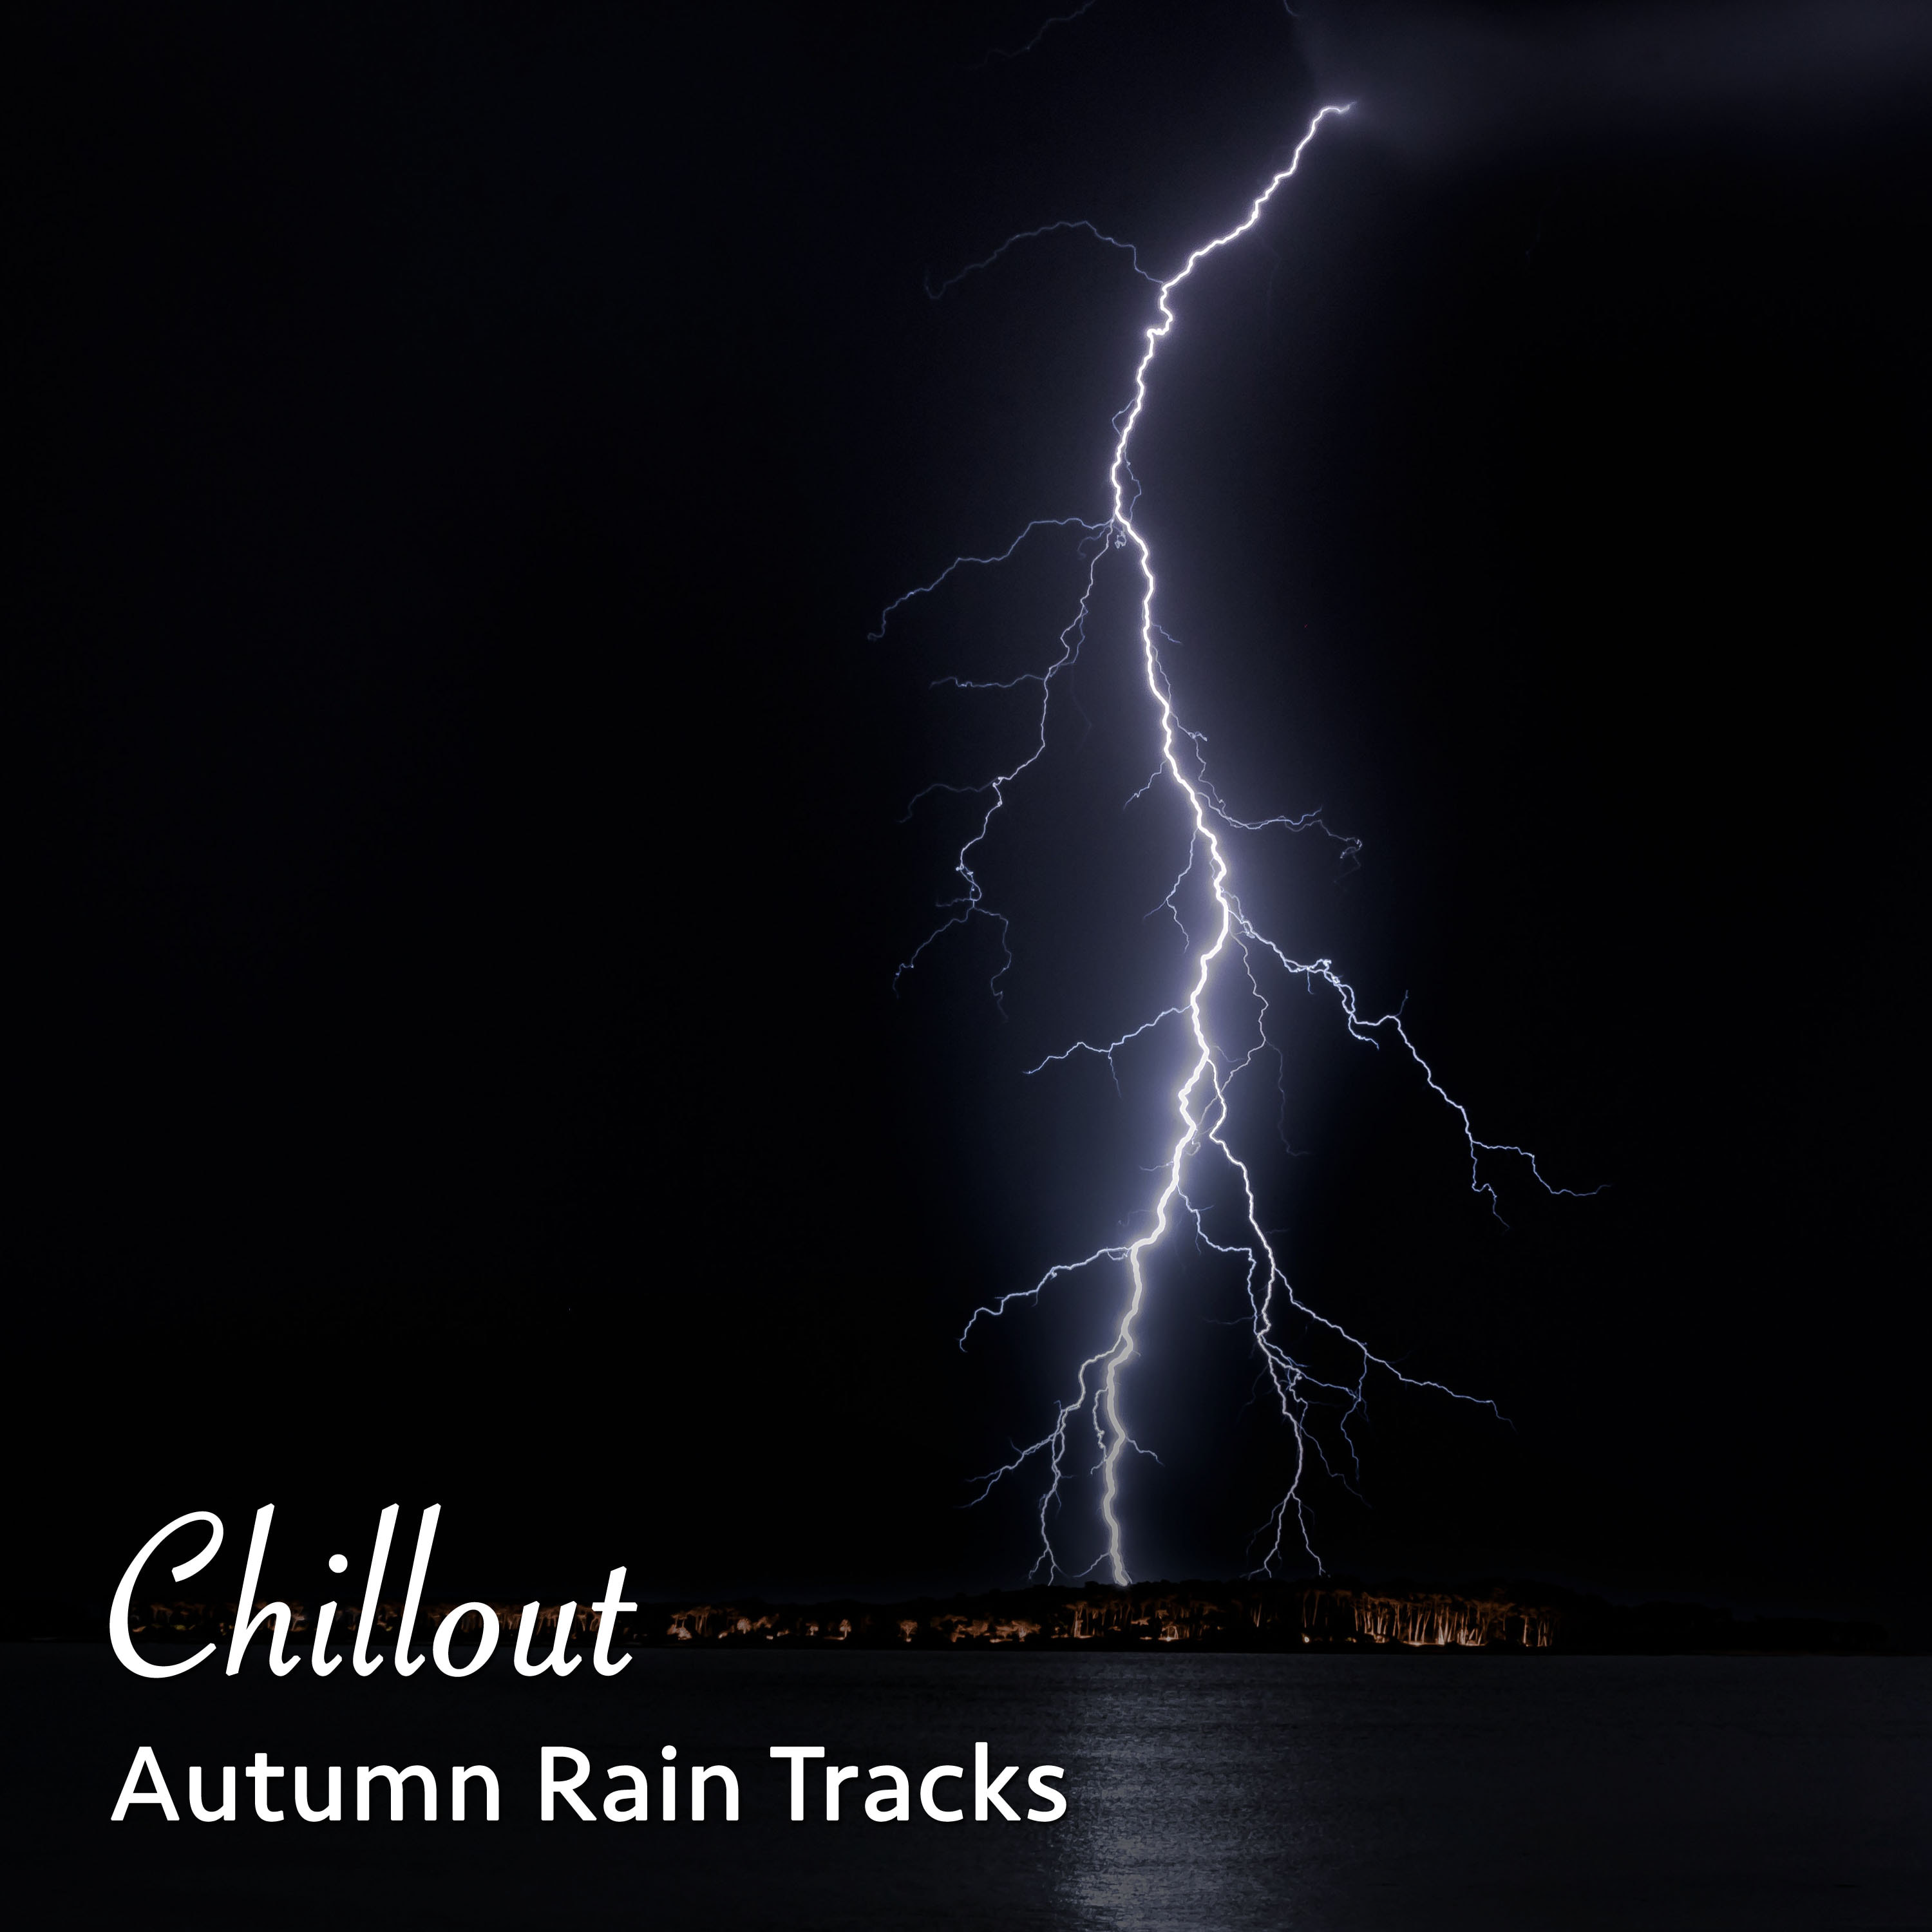 #16 Chillout Autumn Rain Tracks from Nature